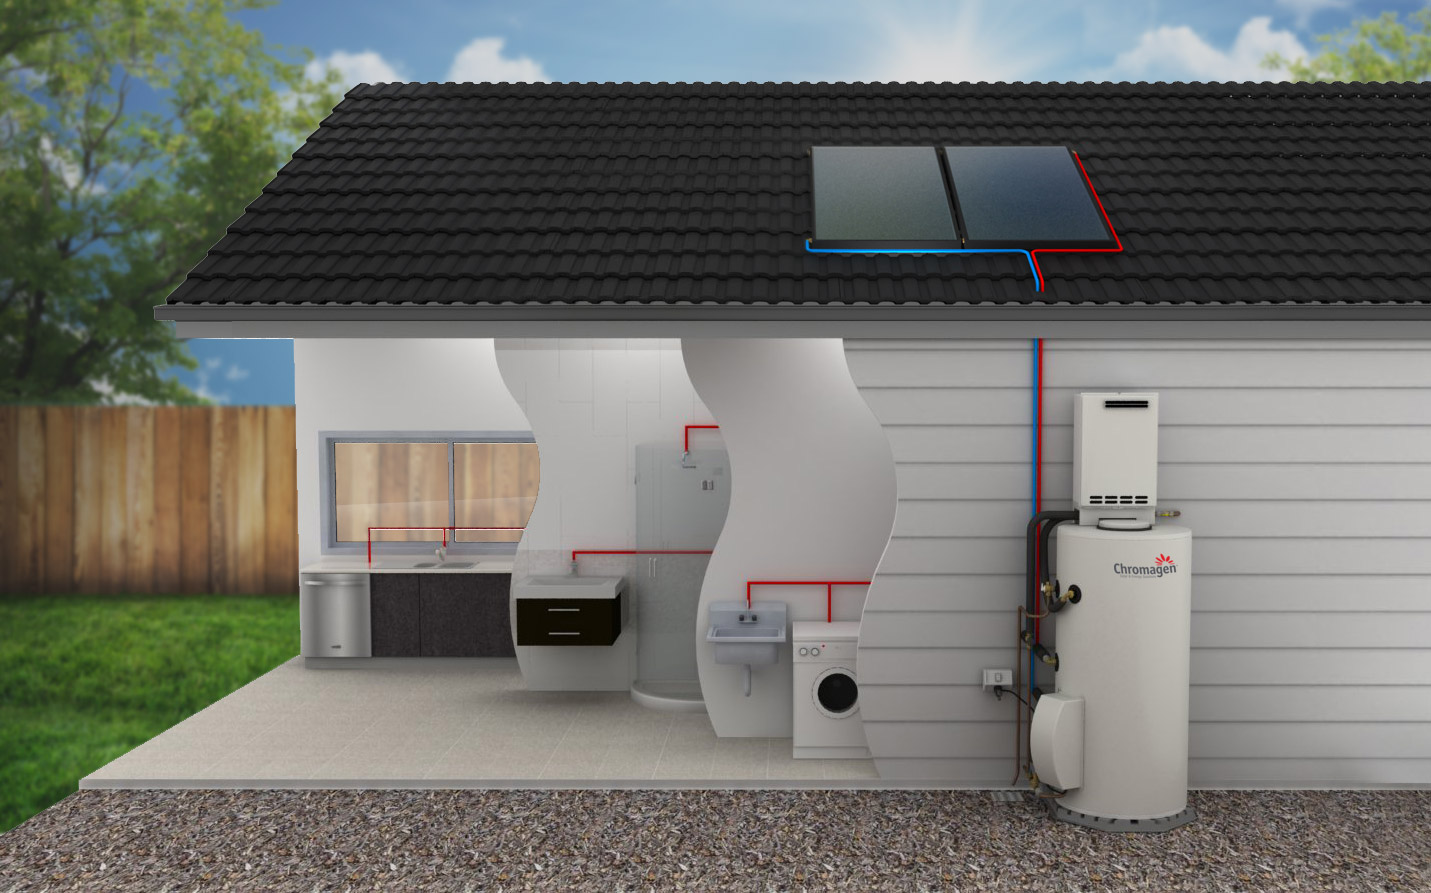 How the SmartLine solar hot water system works